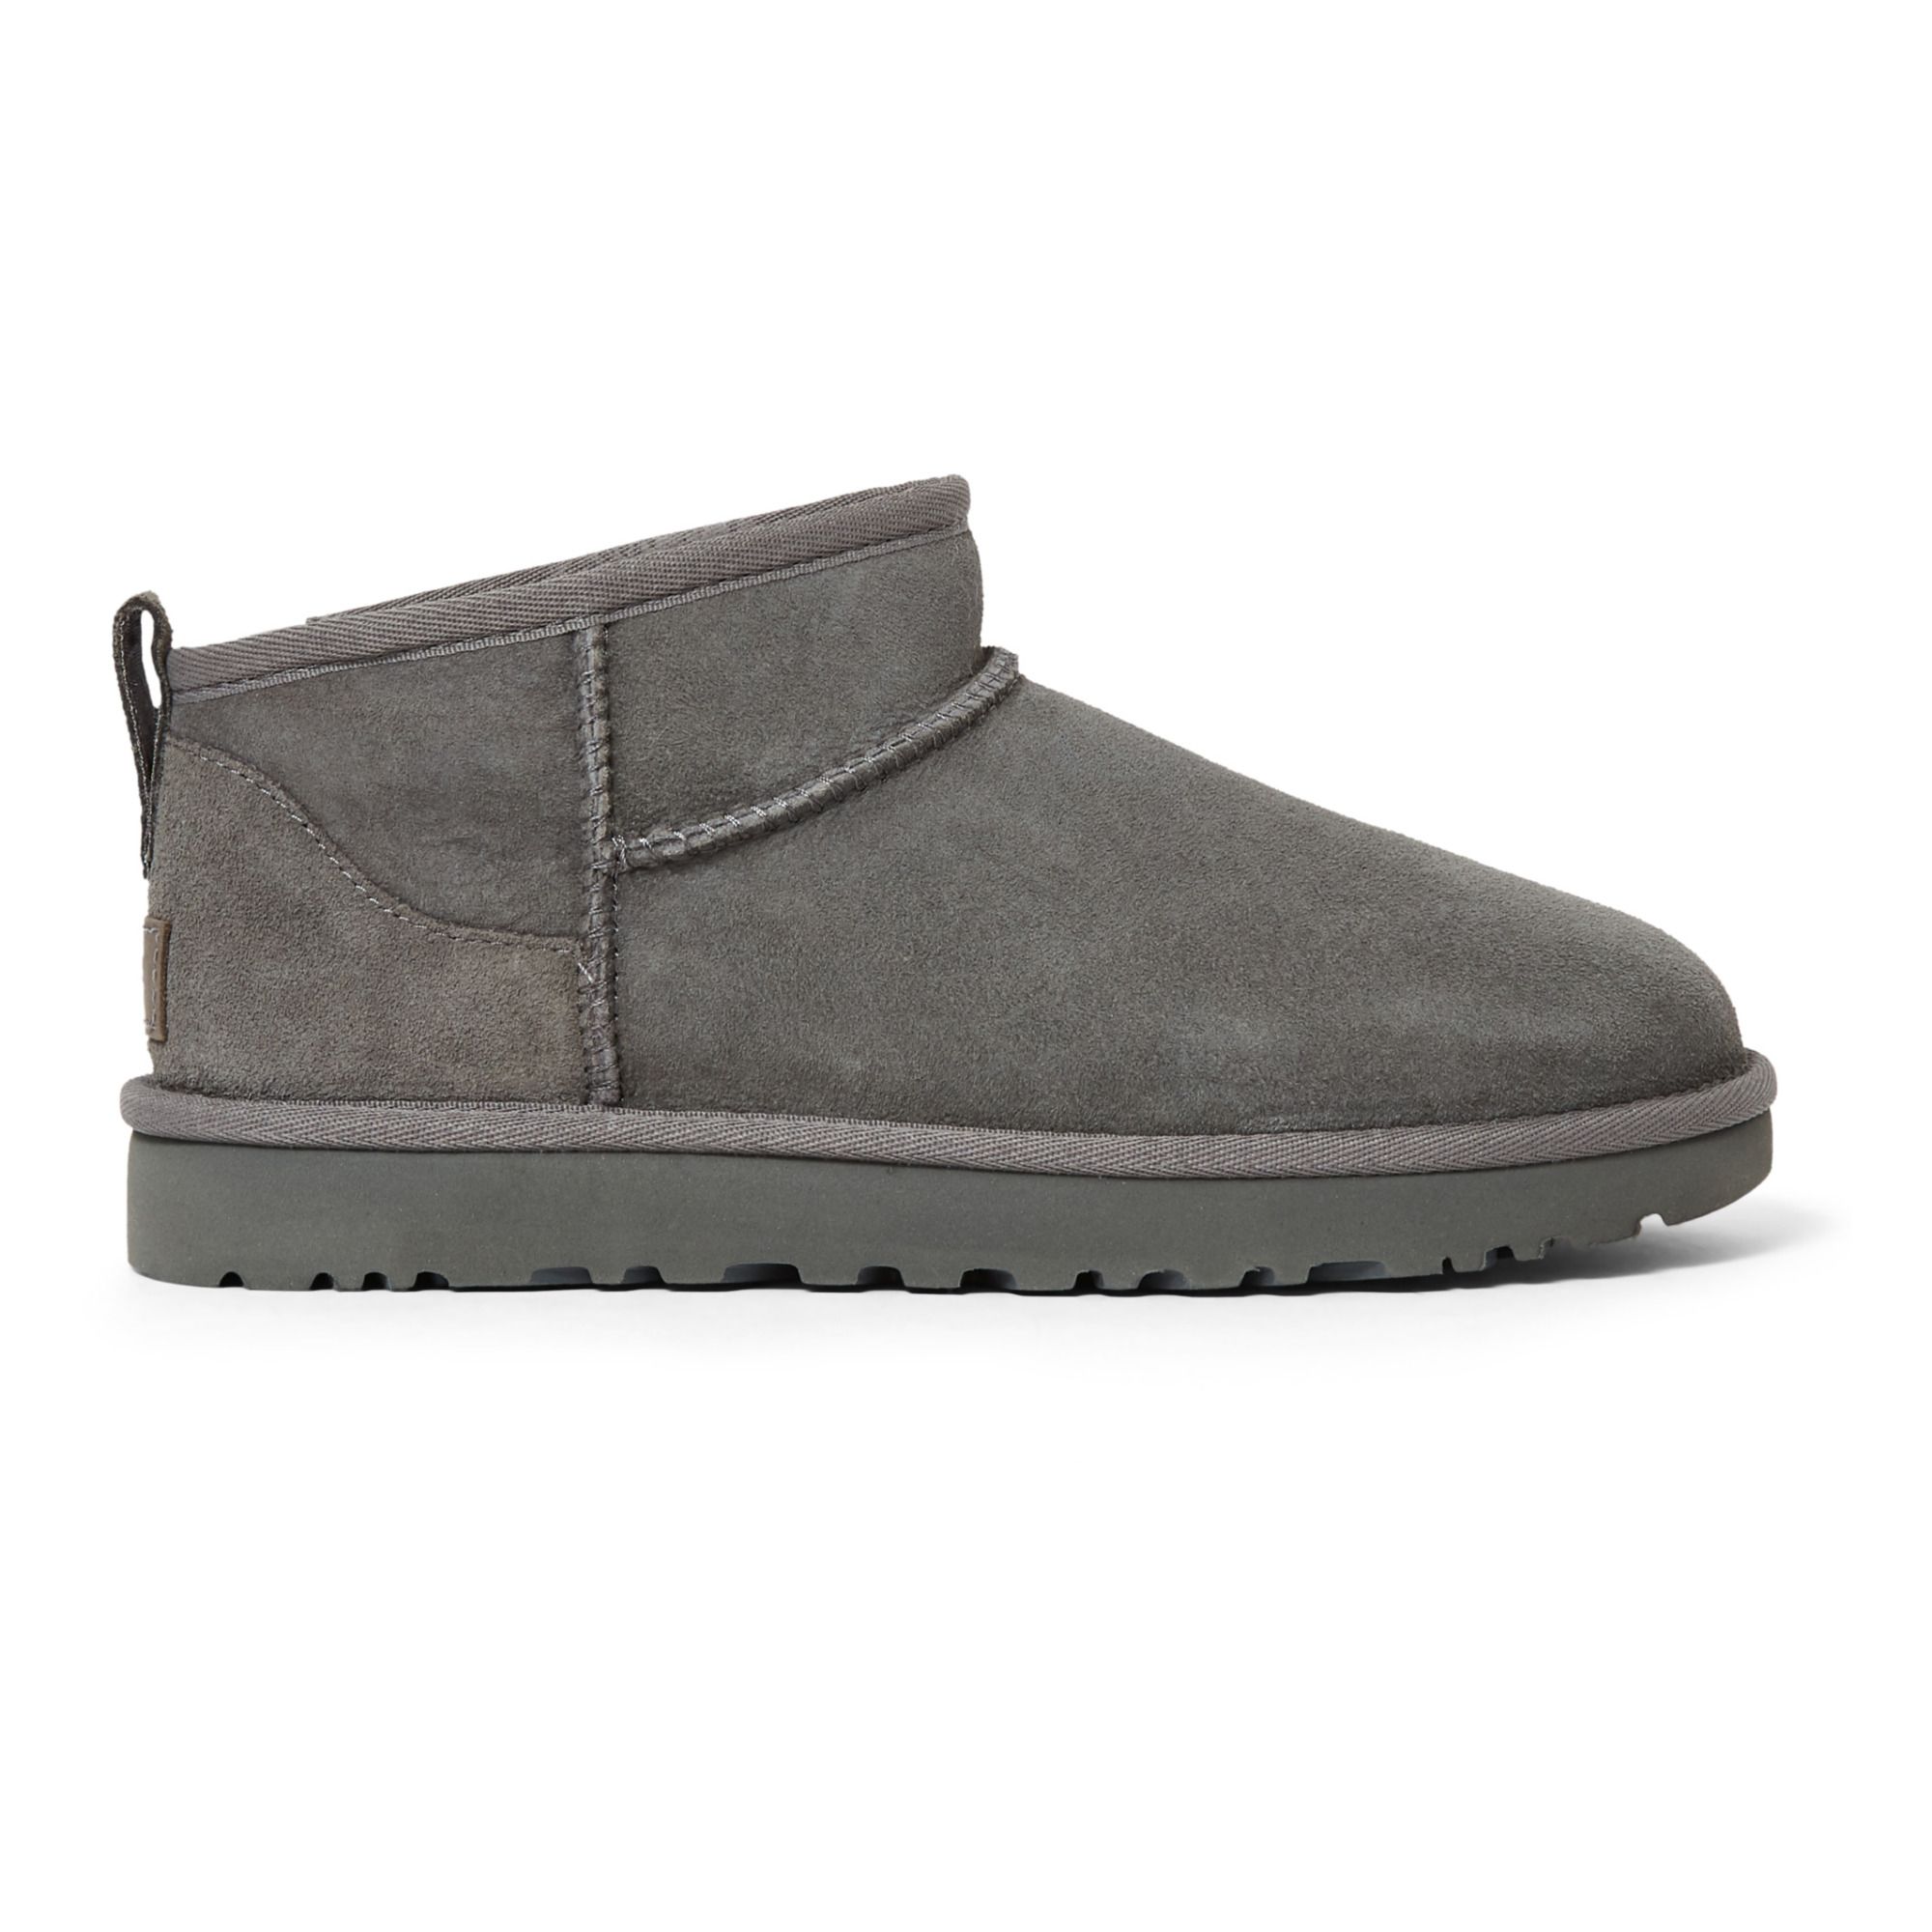 Ugg - Boots Classic Ultra Mini - Collection Femme - Gris